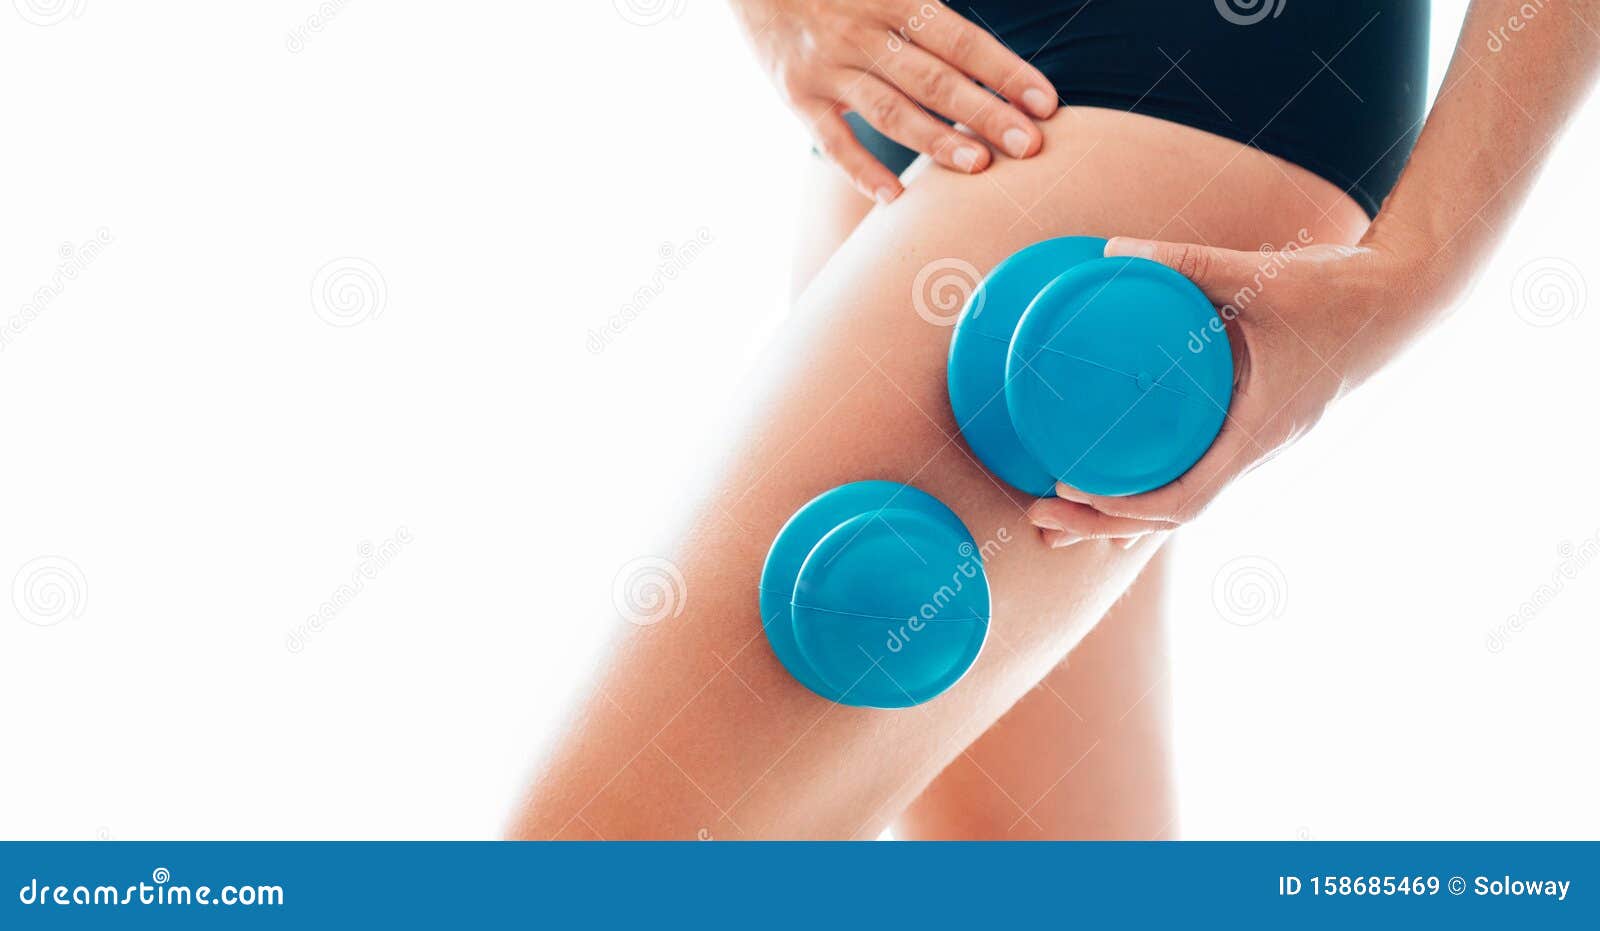 young female making massage using a two silicone cups for vacuum cupping anti-cellulite massage therapy on her thigh zone skin